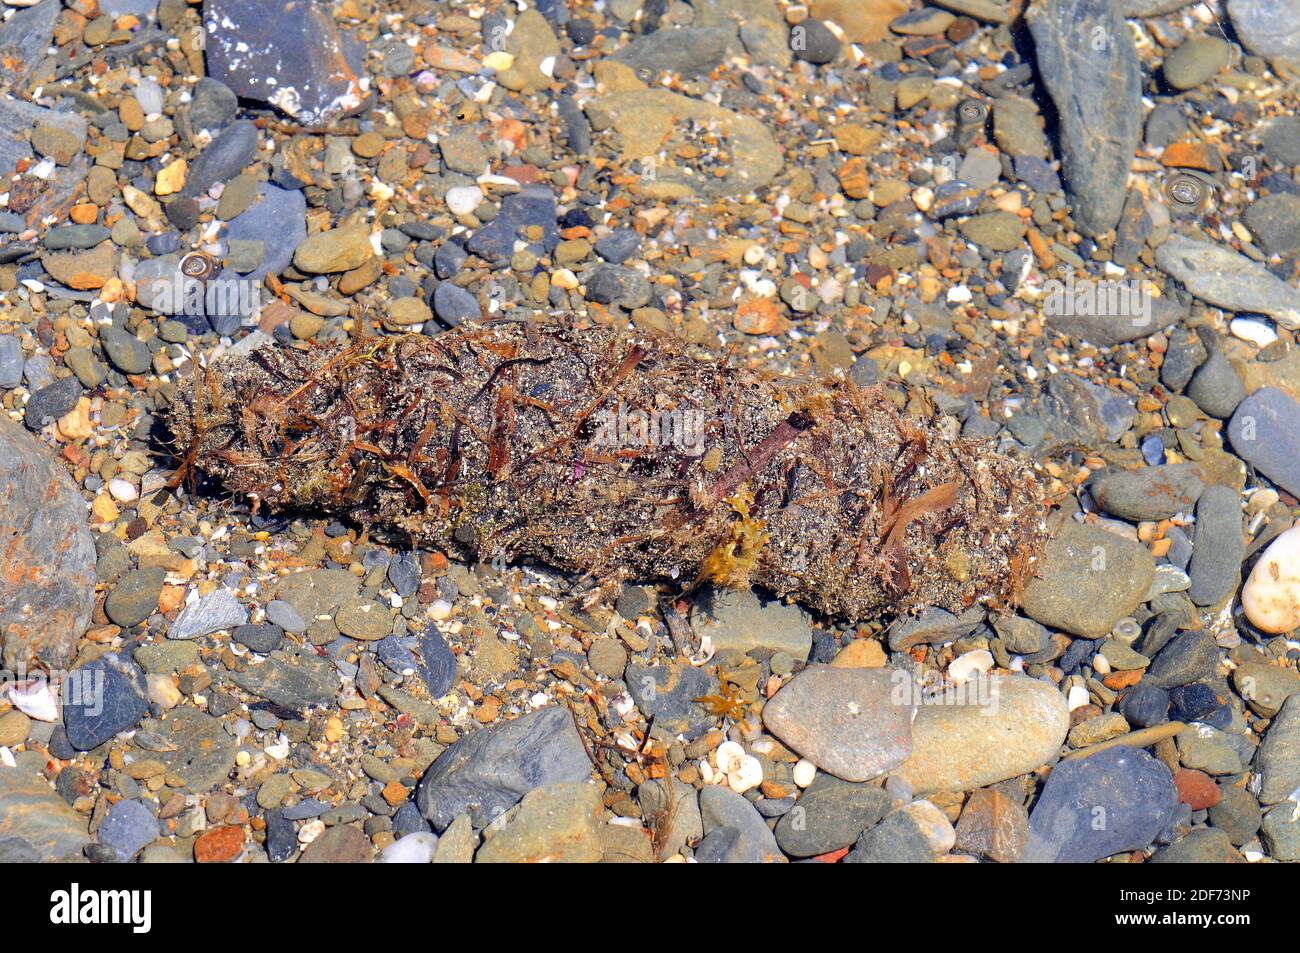 Tubular sea cucumber (Holothuria tubulosa) is a species of sea cucumber feeds on detritus and plankton. Cryptic specimen covered with remains of Stock Photo